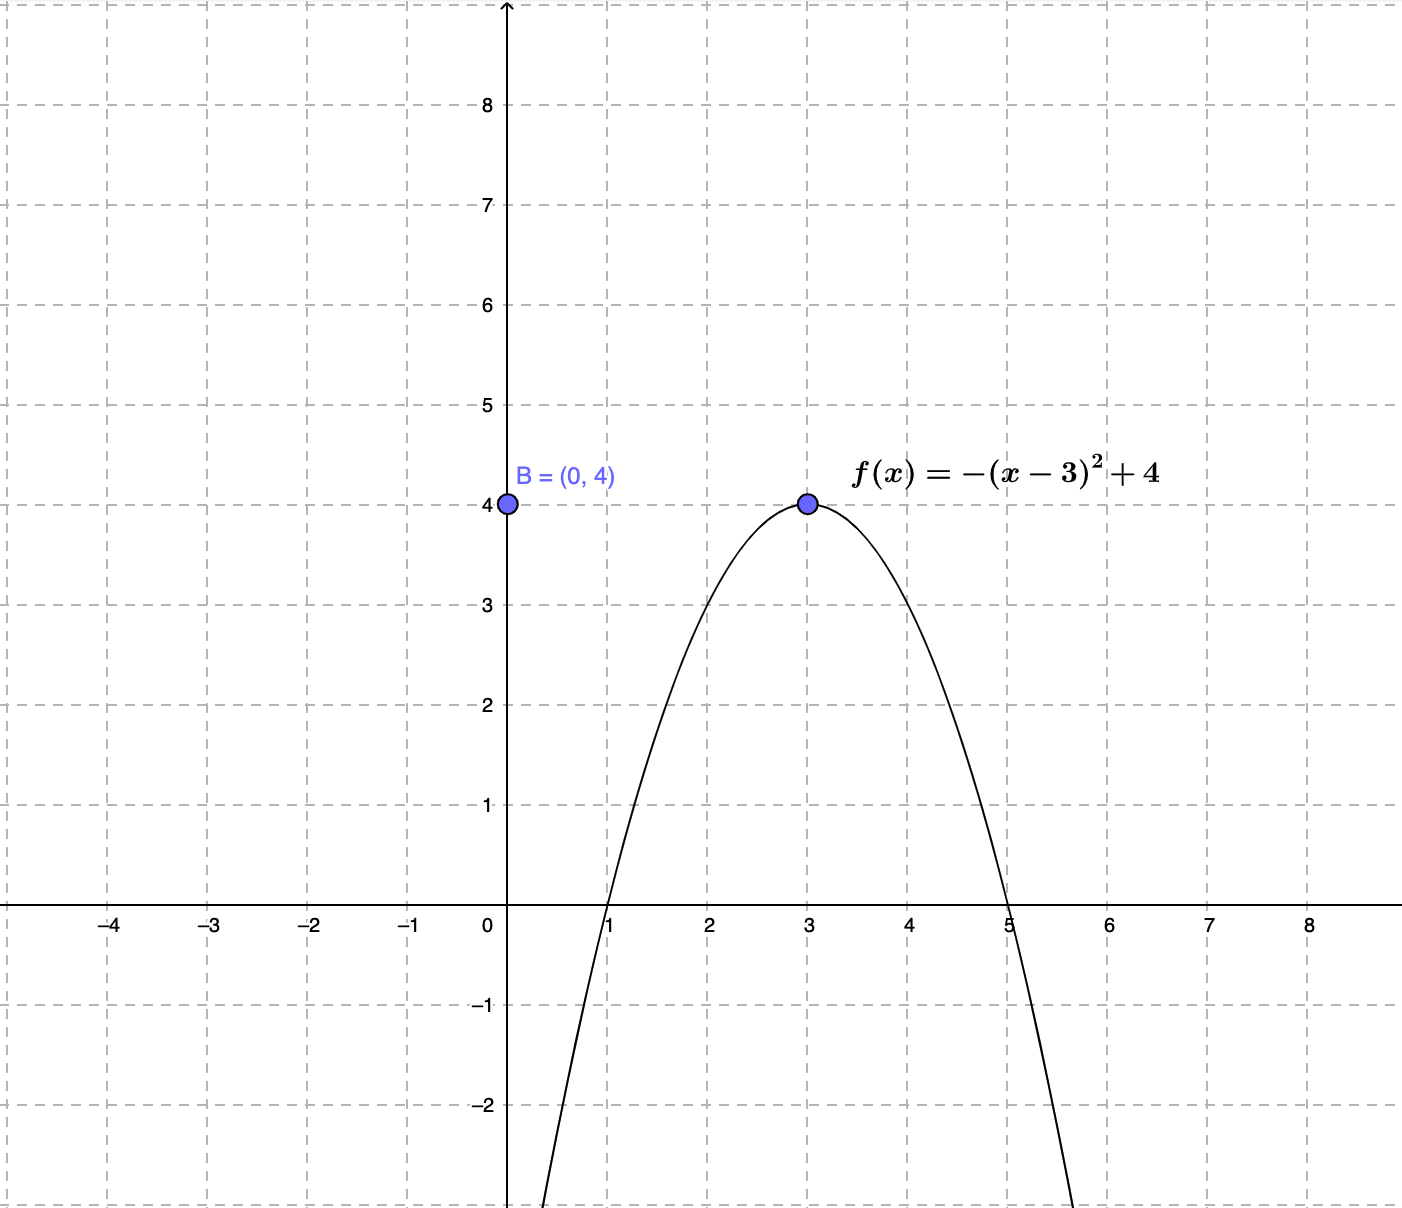 34. Which of the following intervals is the range of the functionf(x)=−(x−3)2 +4?